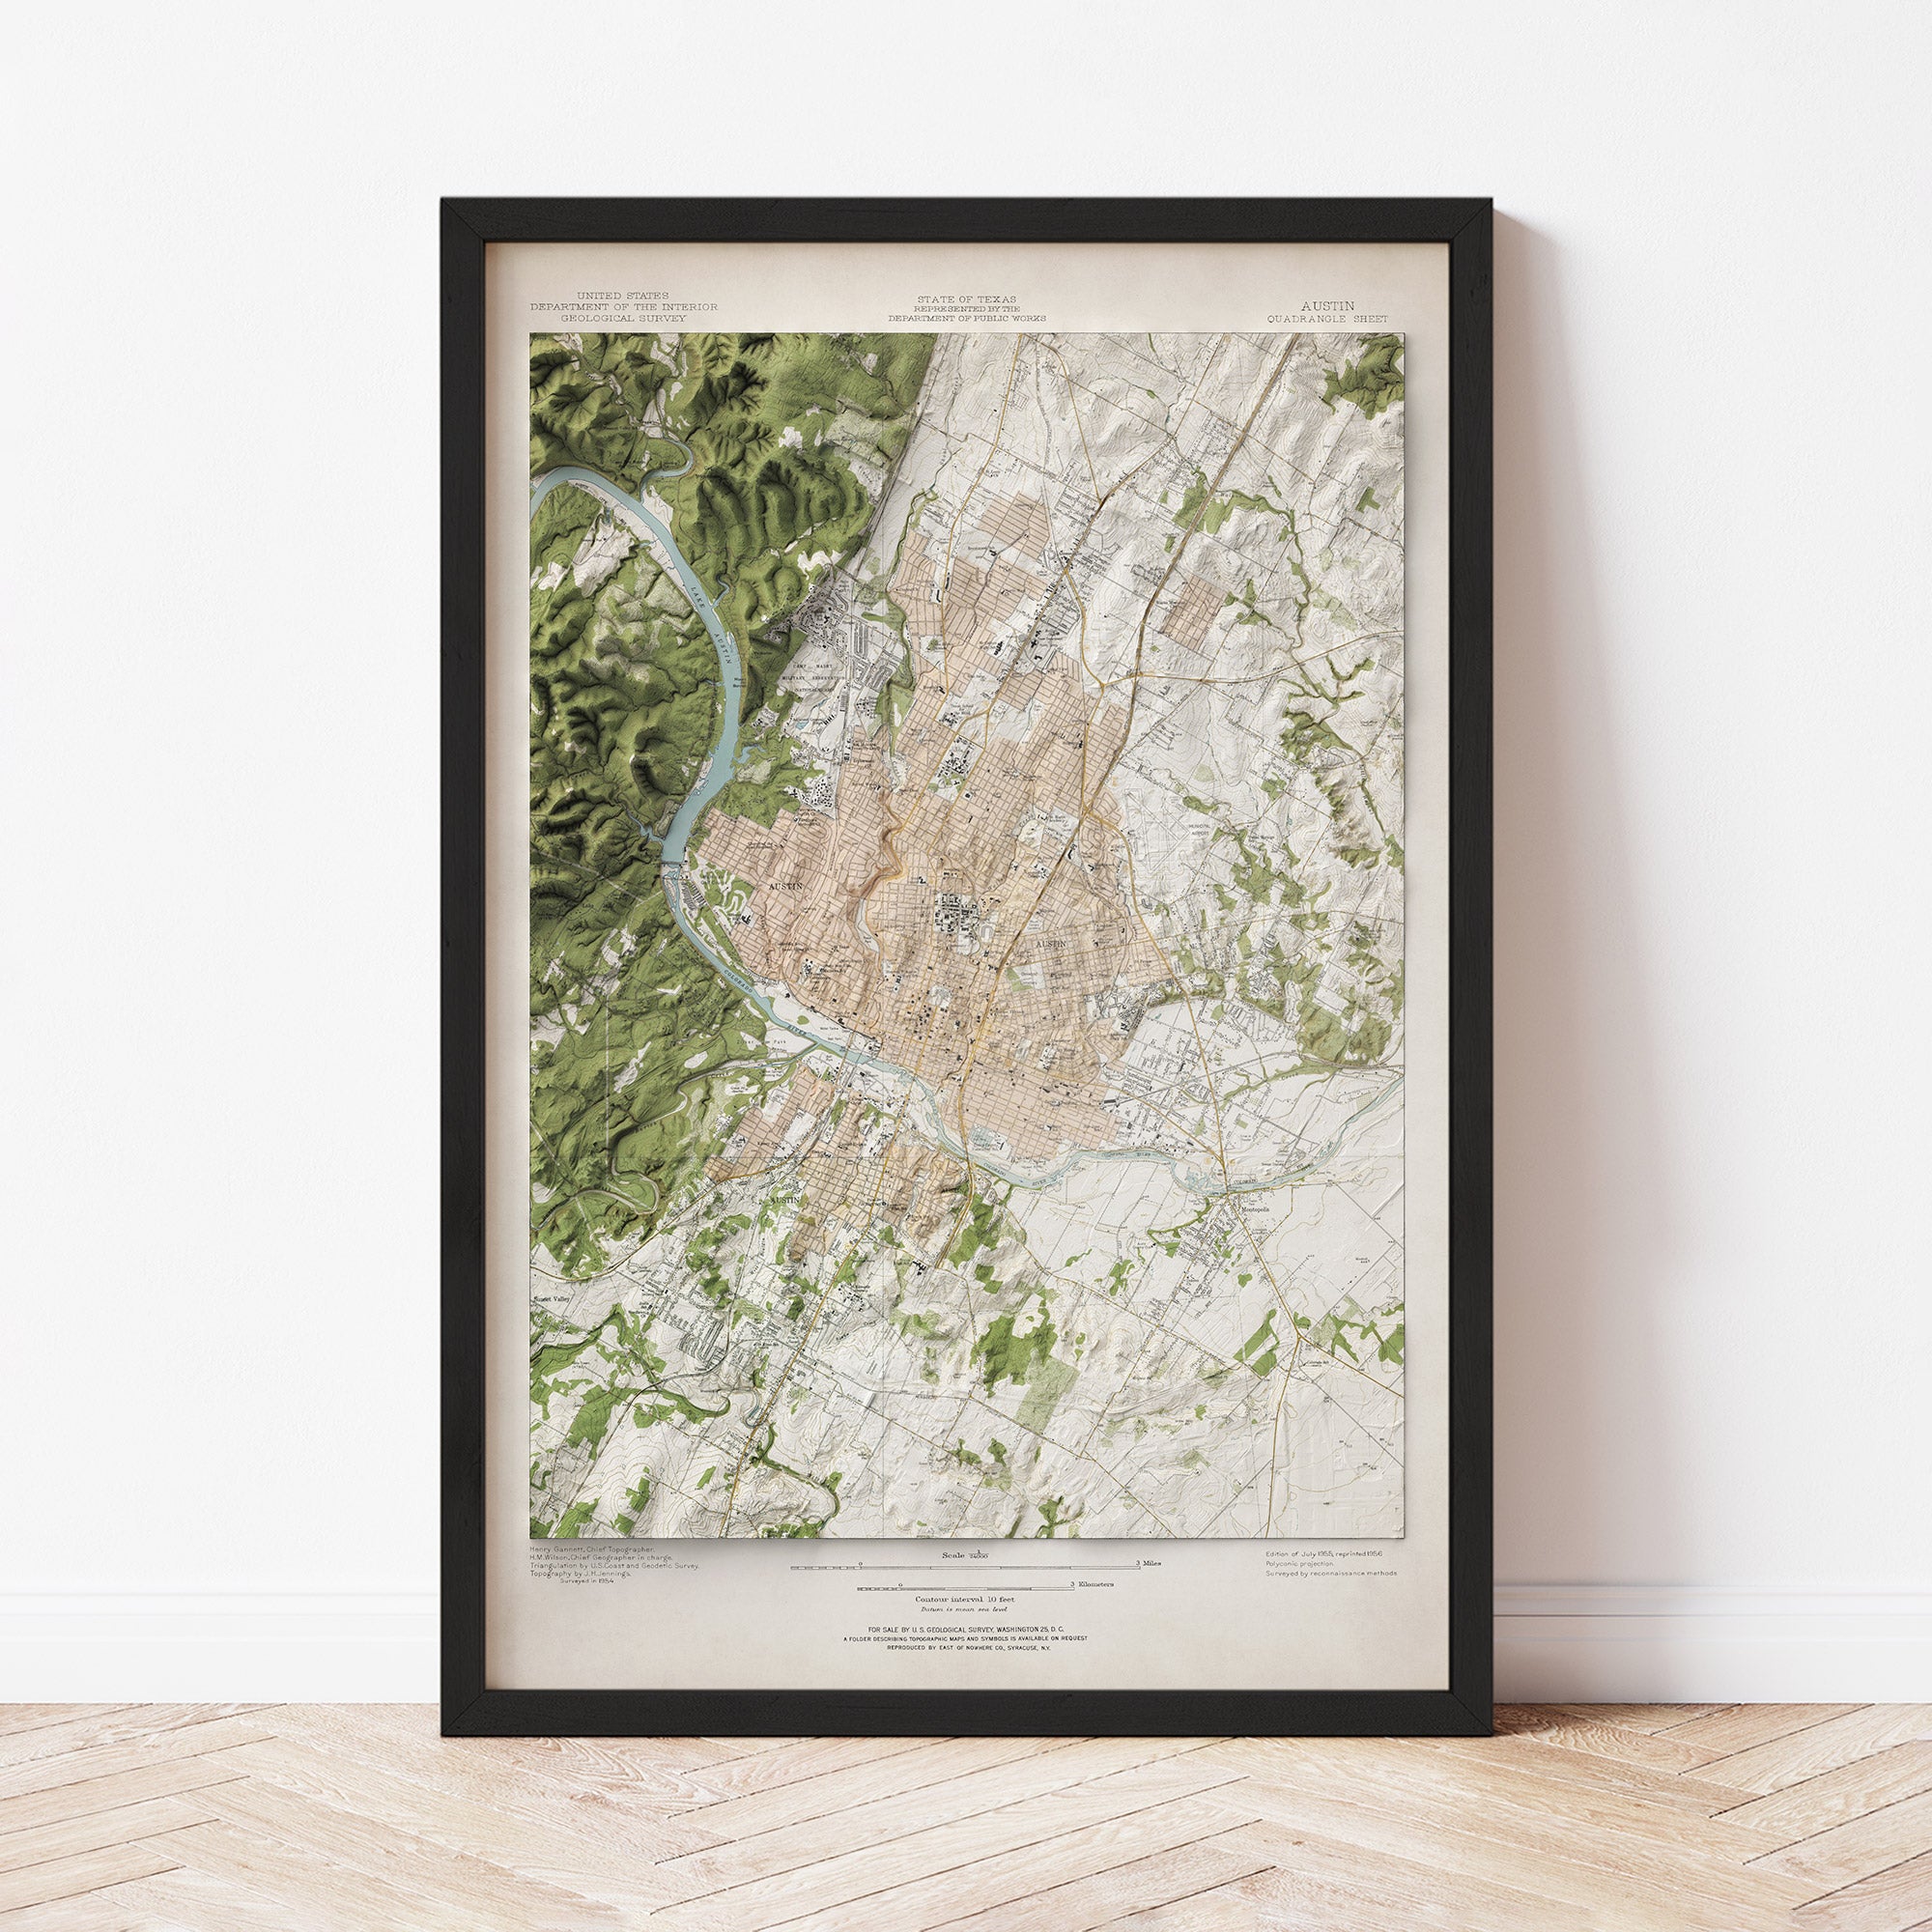 Austin, TX - Vintage Shaded Relief Map (1955)